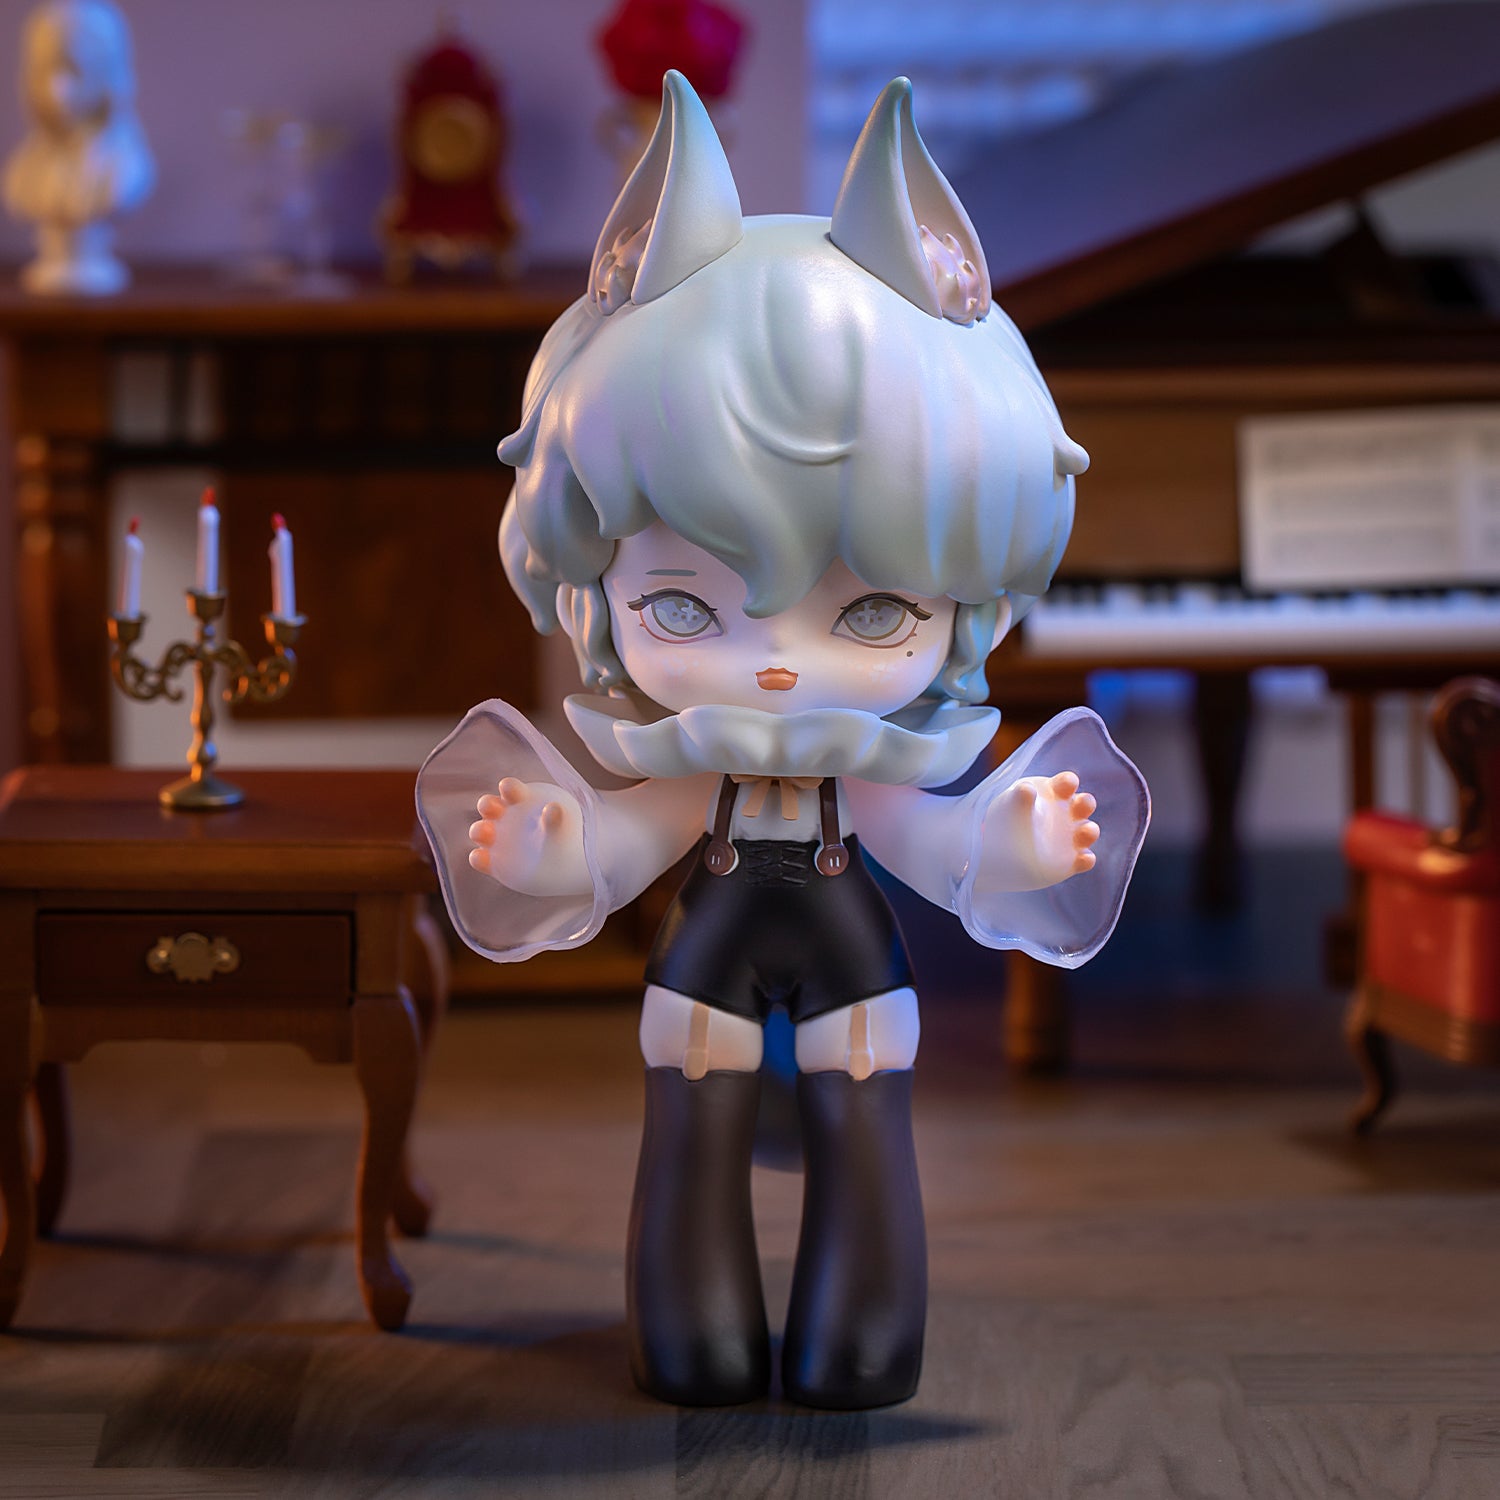 Lucky Emma - MISYA Incredible Mansion Party Blind Box Series